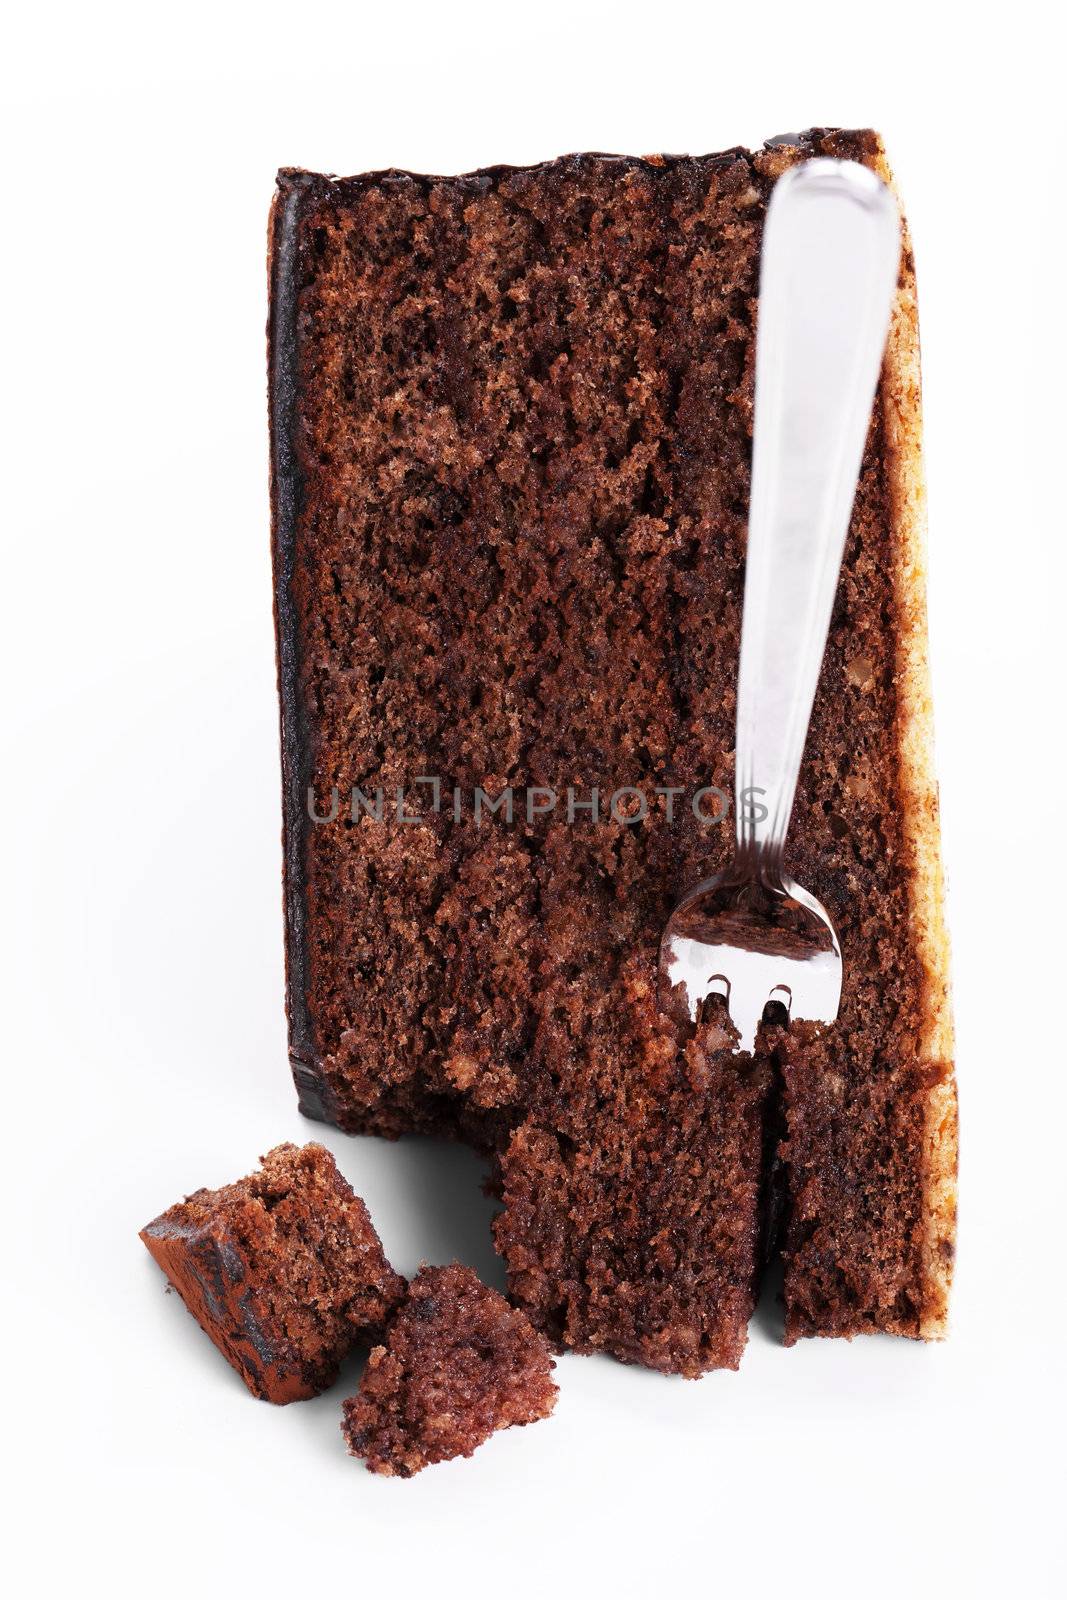 fork in a chocolate cake by RobStark